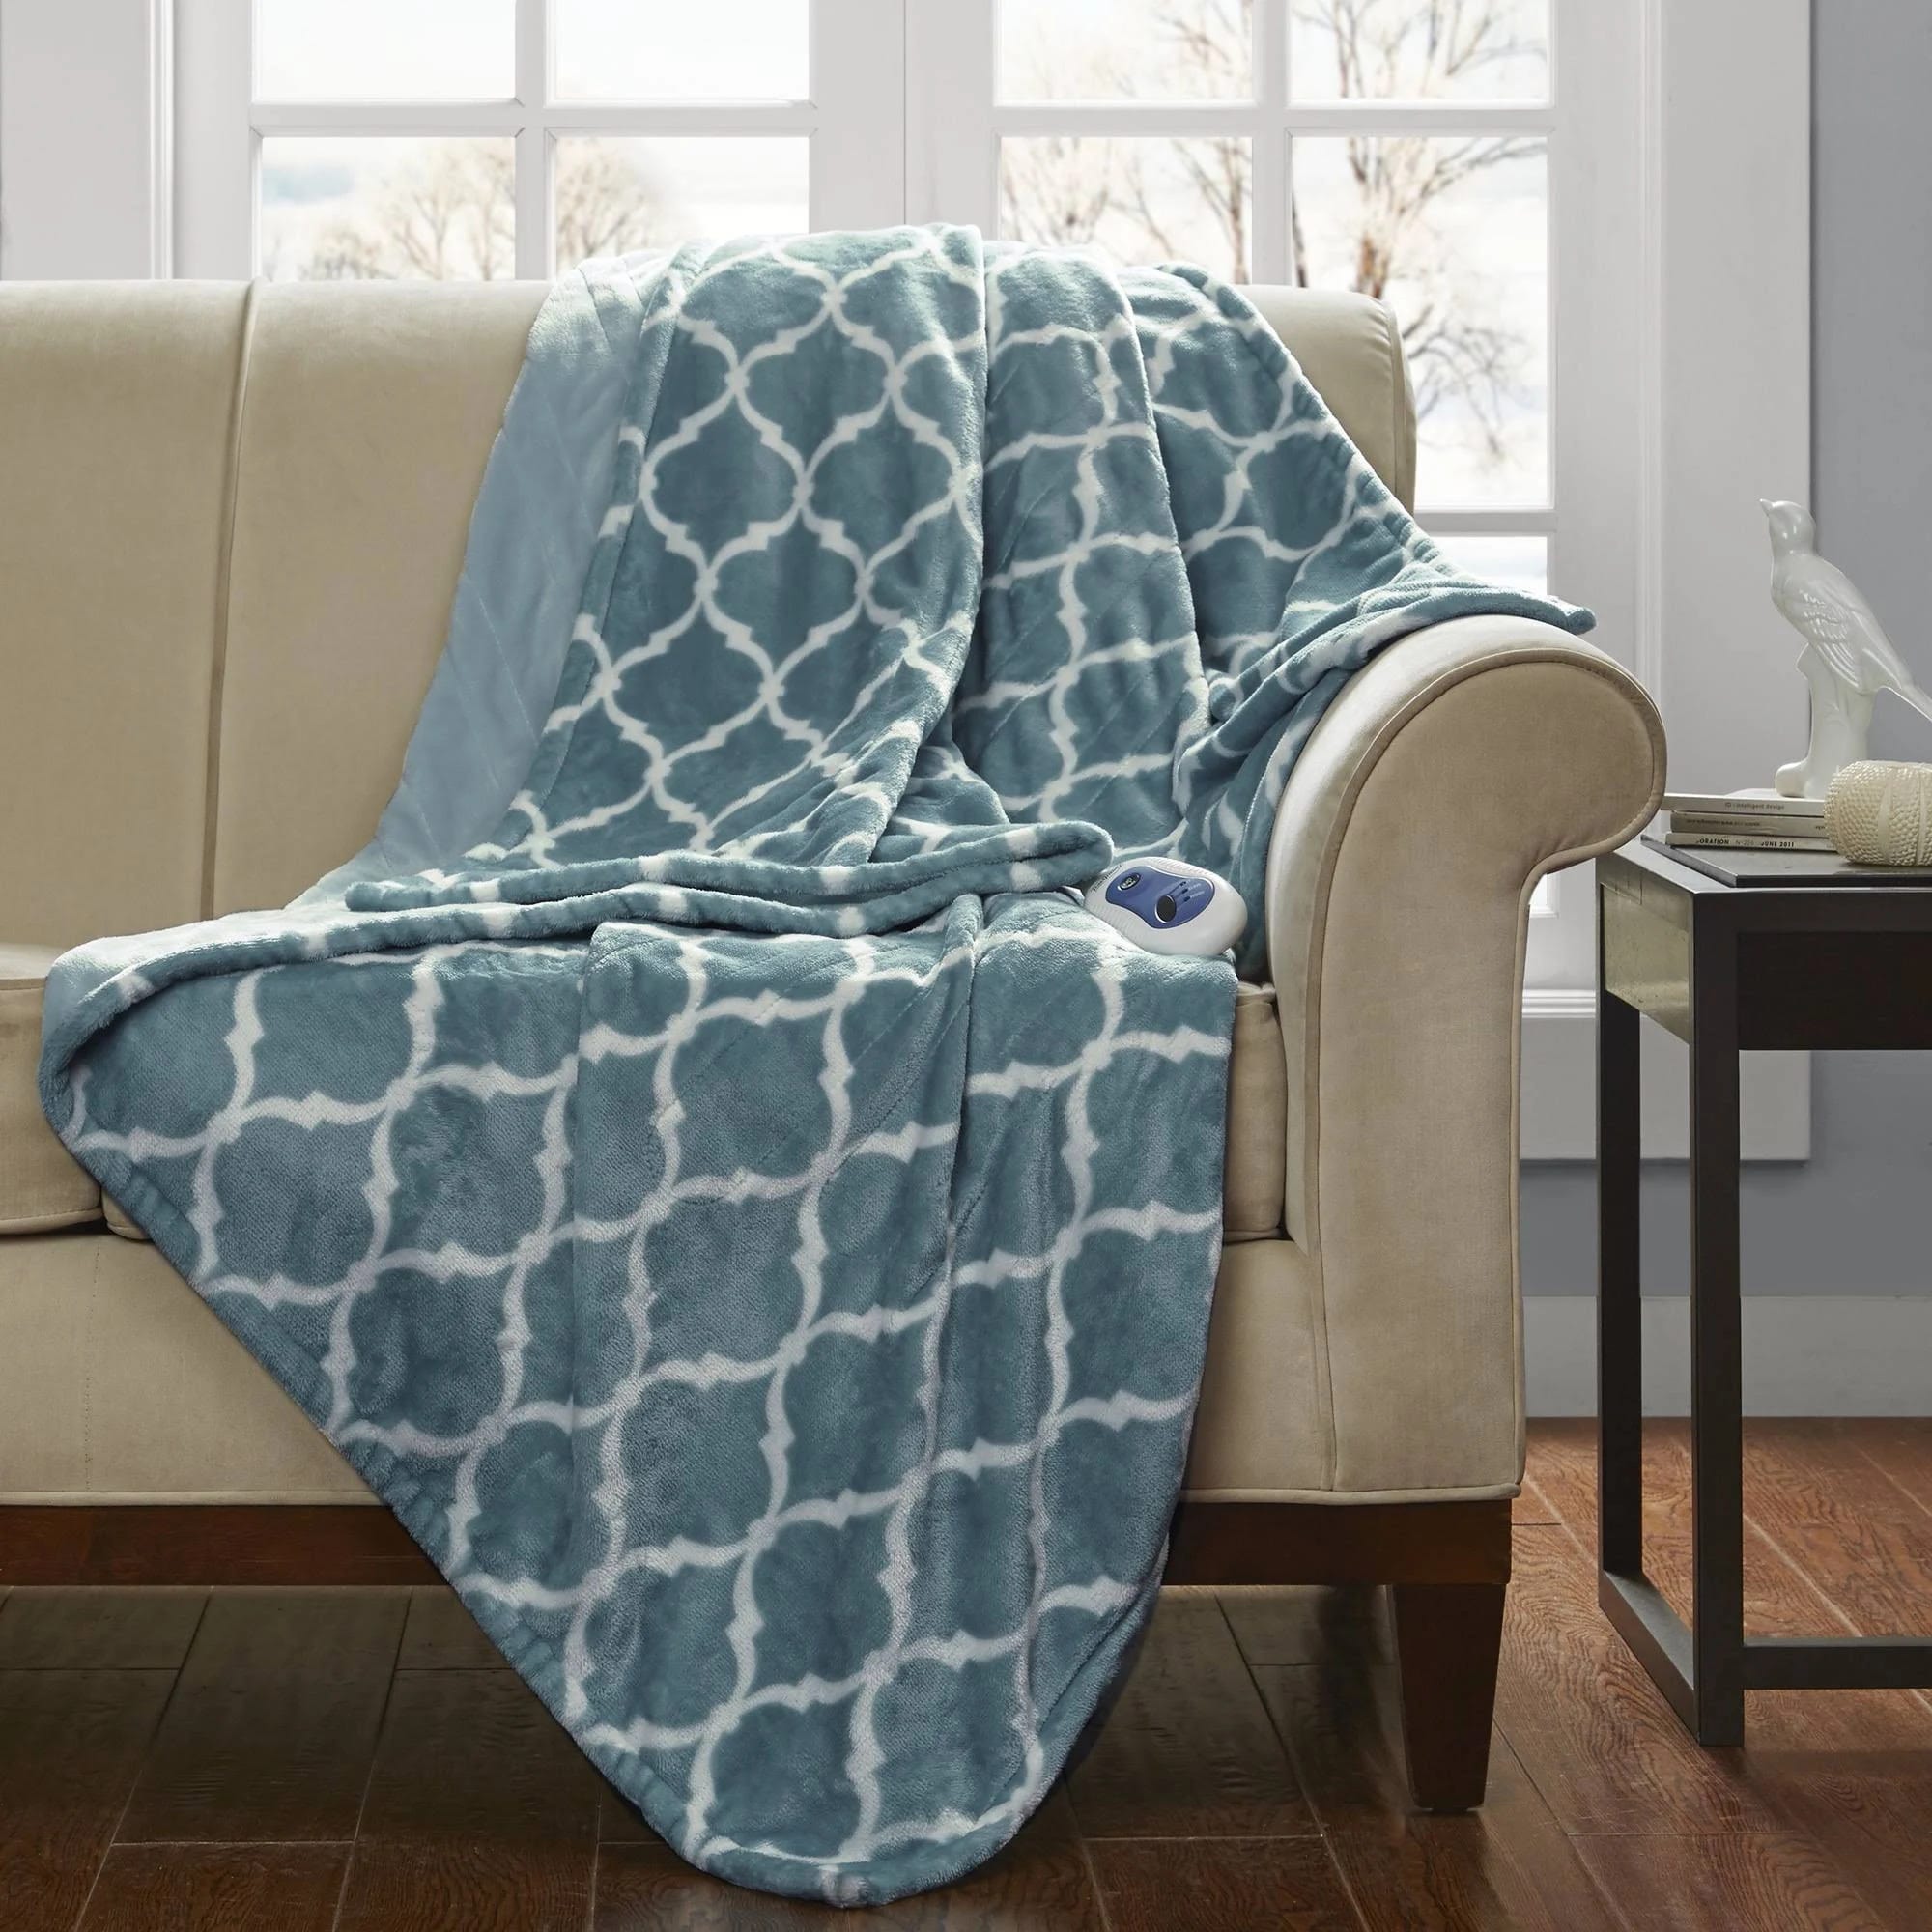 Beautyrest Heated Ogee Throw - Aqua - 60 X 70 with Secure Comfort Technology | Image